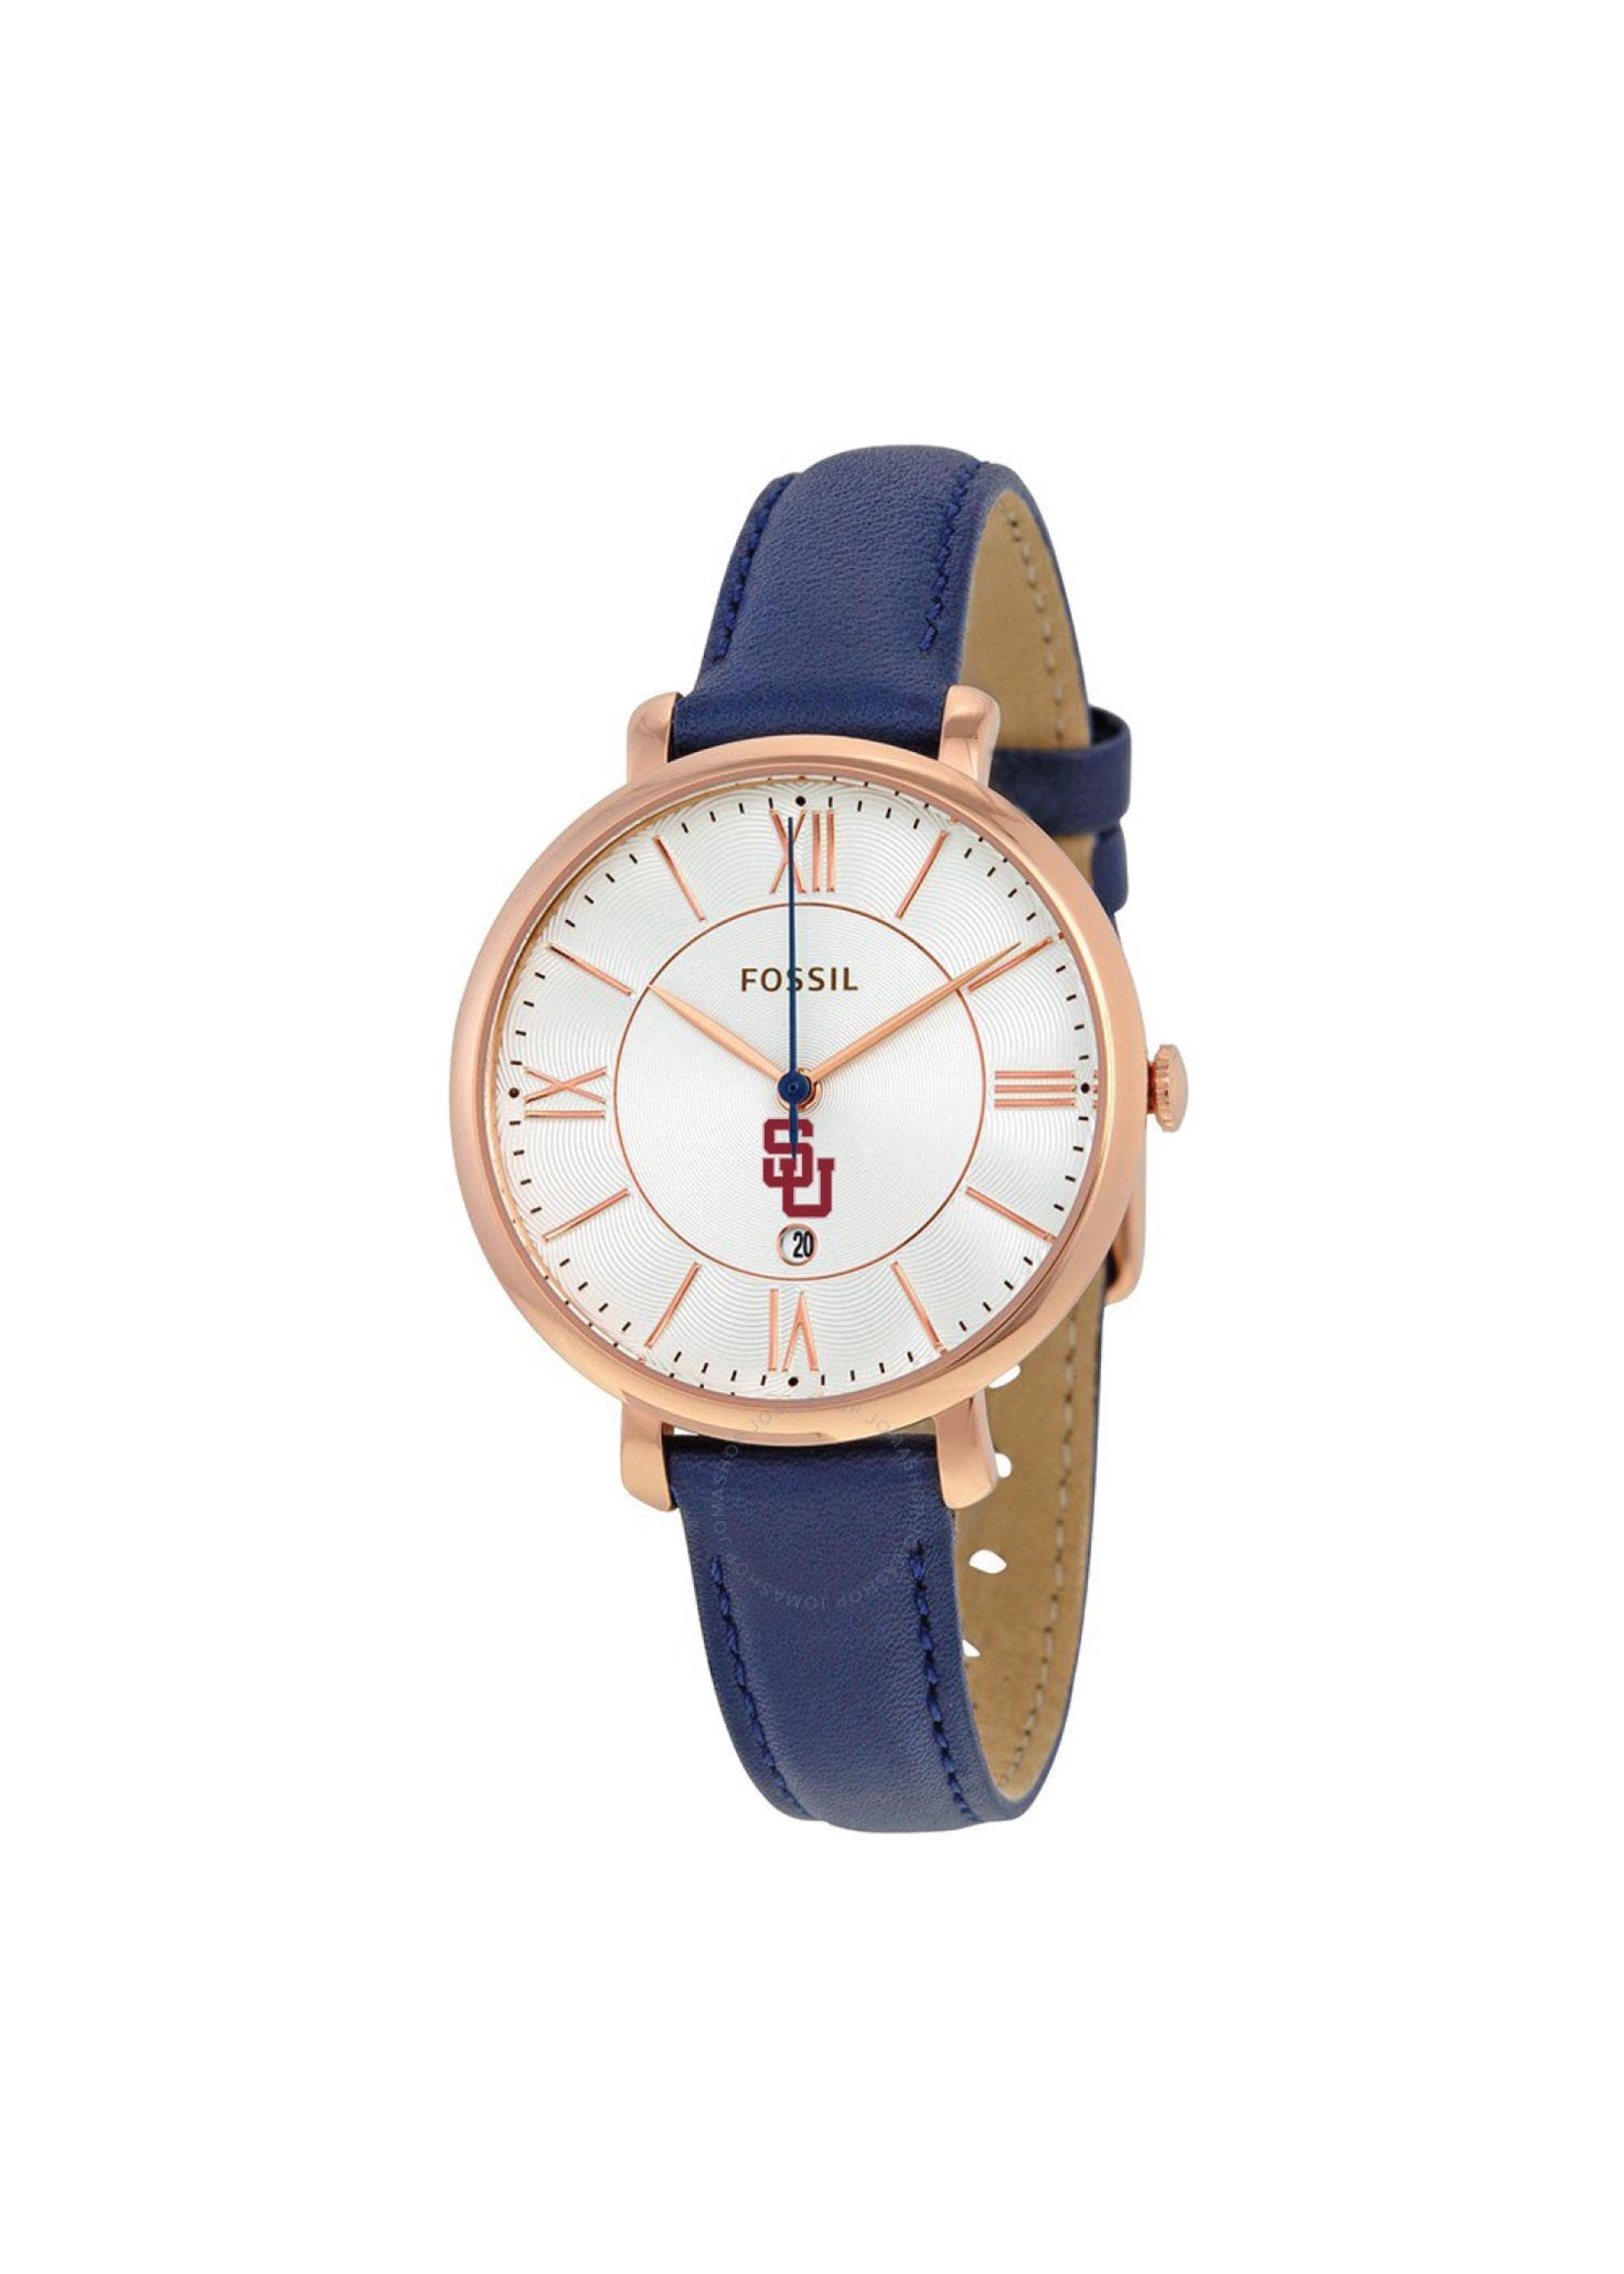 Fossil Fossil Women's Navy Leather Watch